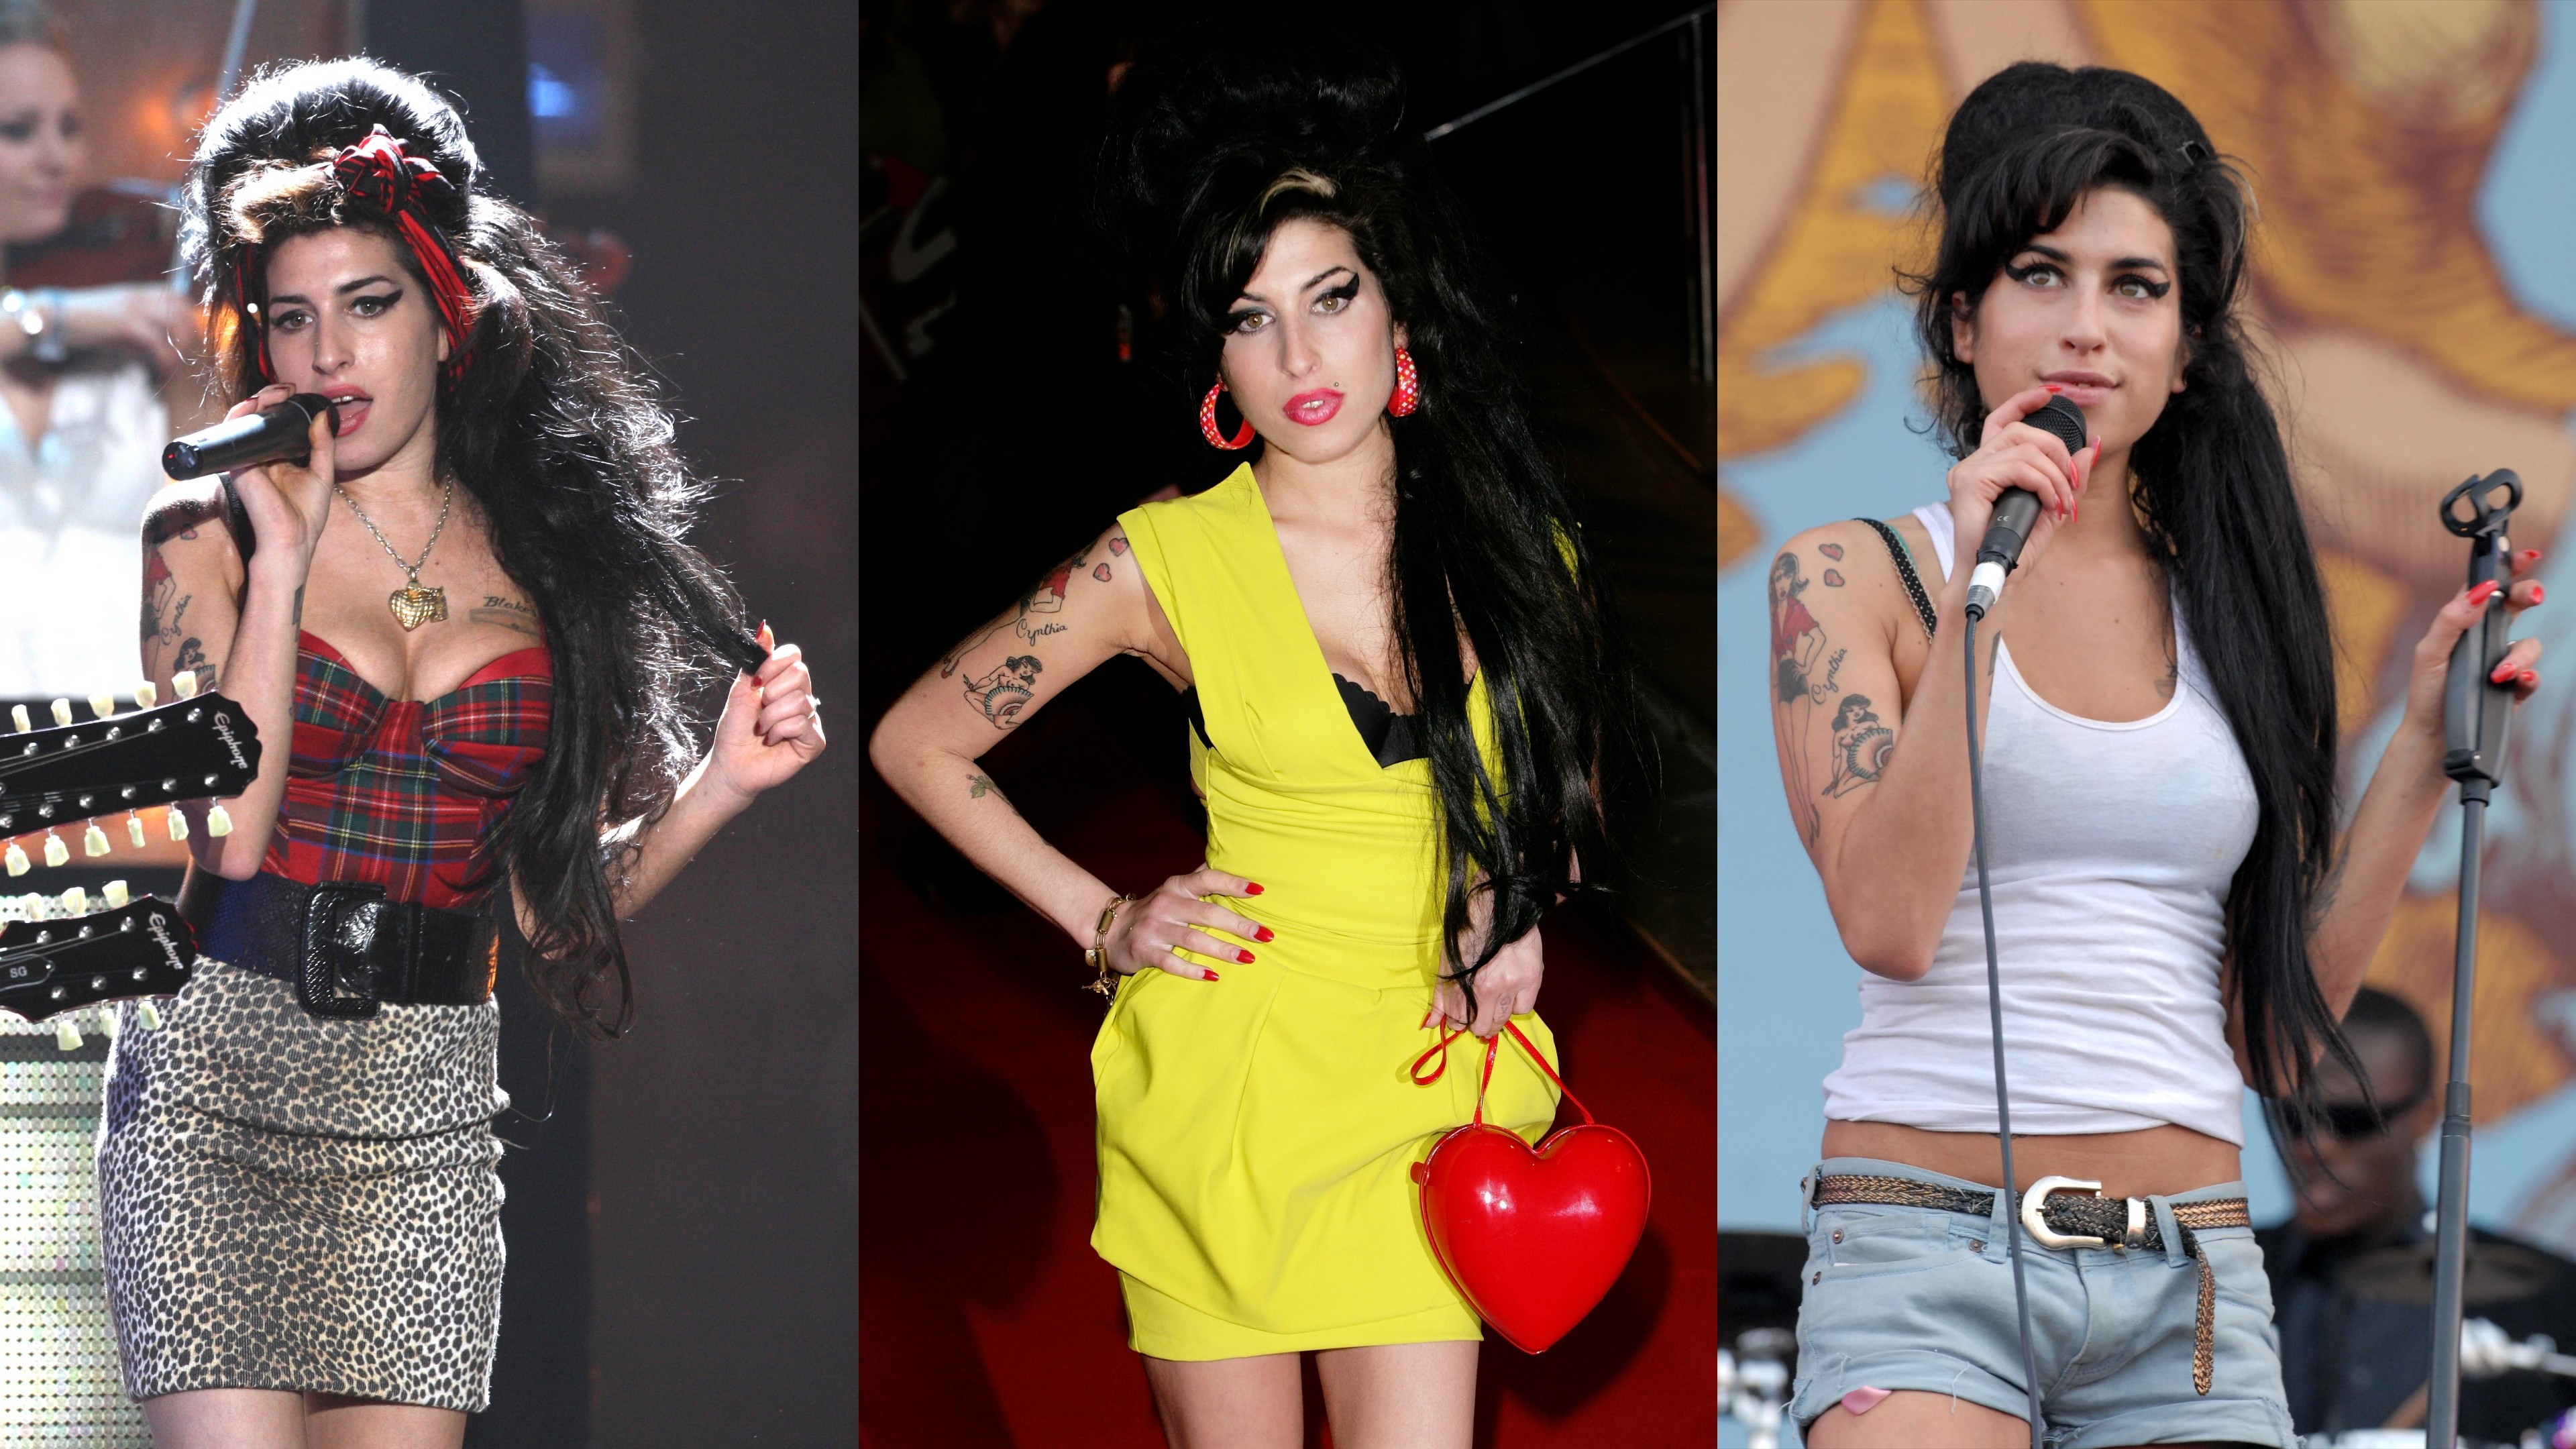 Everything We Know About 'Back to Black', the Controversial Amy Winehouse  Film